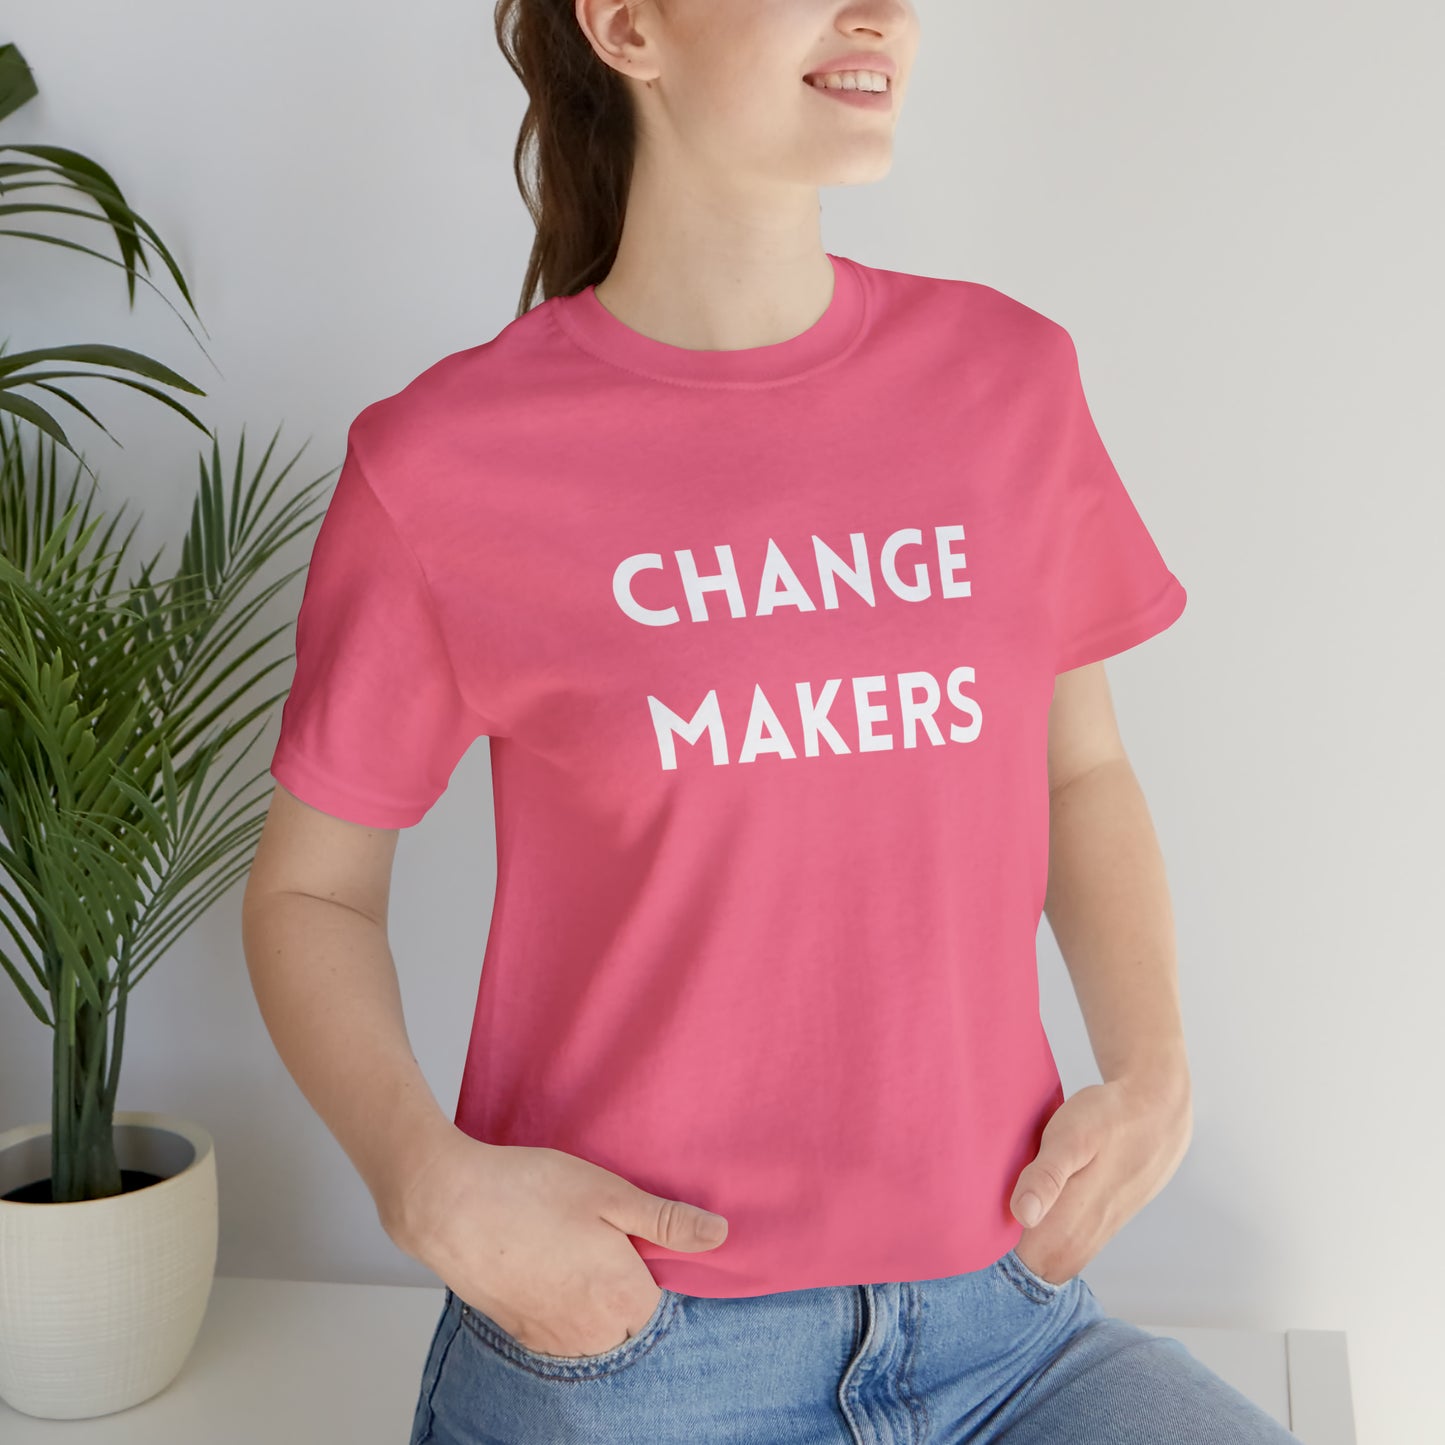 Inspirational T-Shirt About Change | For Change Maker Charity Pink T-Shirt Petrova Designs